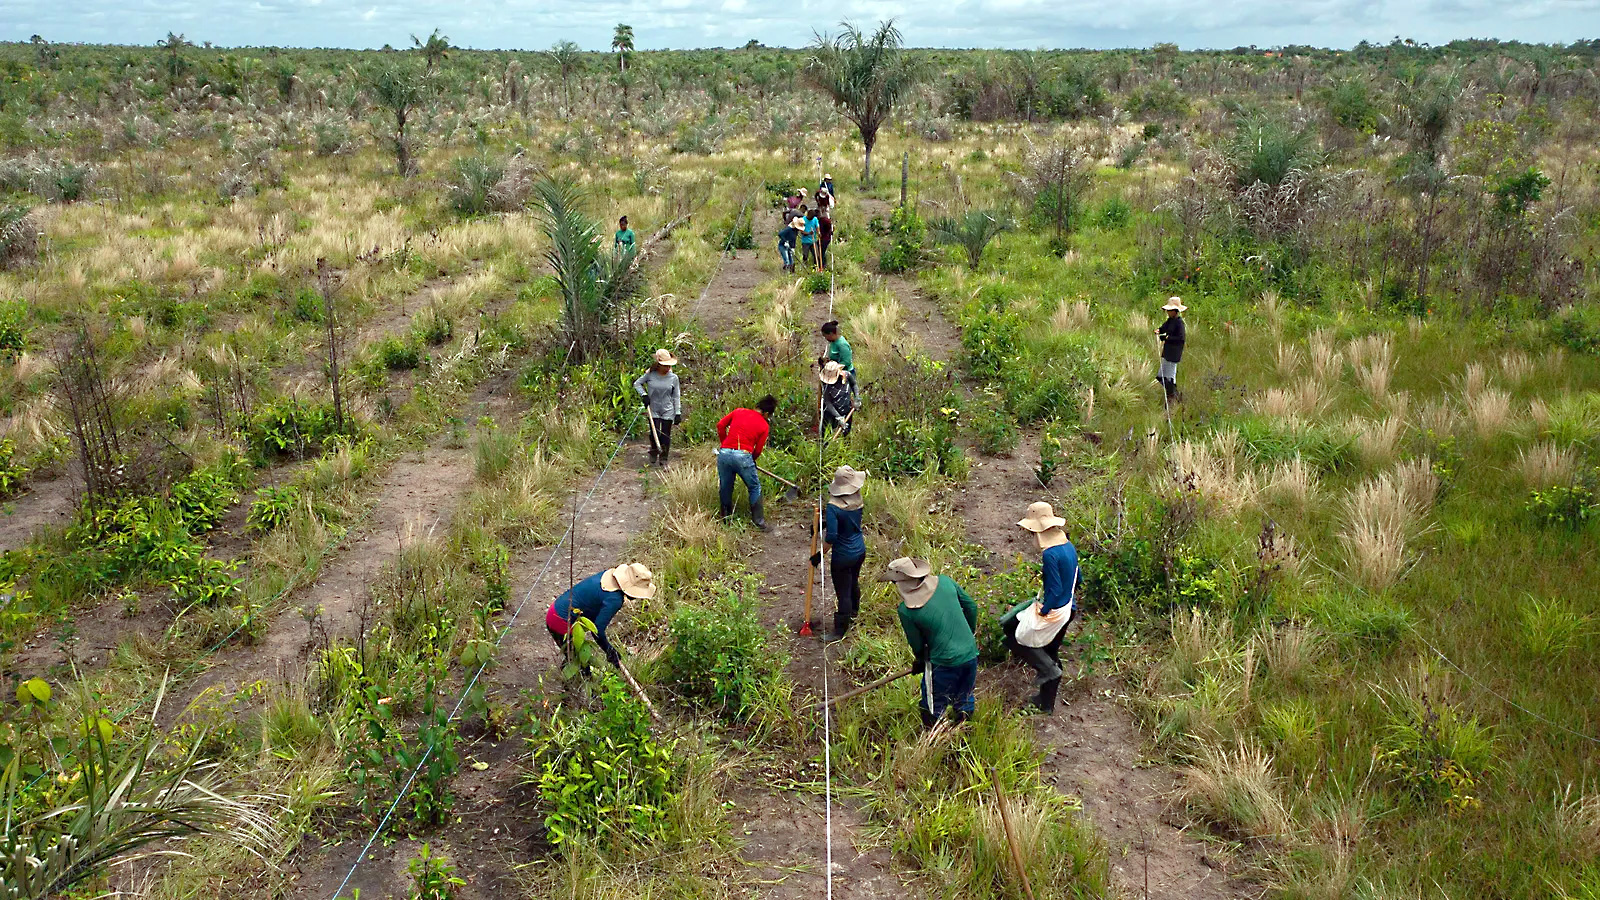 Eden Reforestation Projects: The Eden team working to restore a deforested portion of the Amazon rainforest.